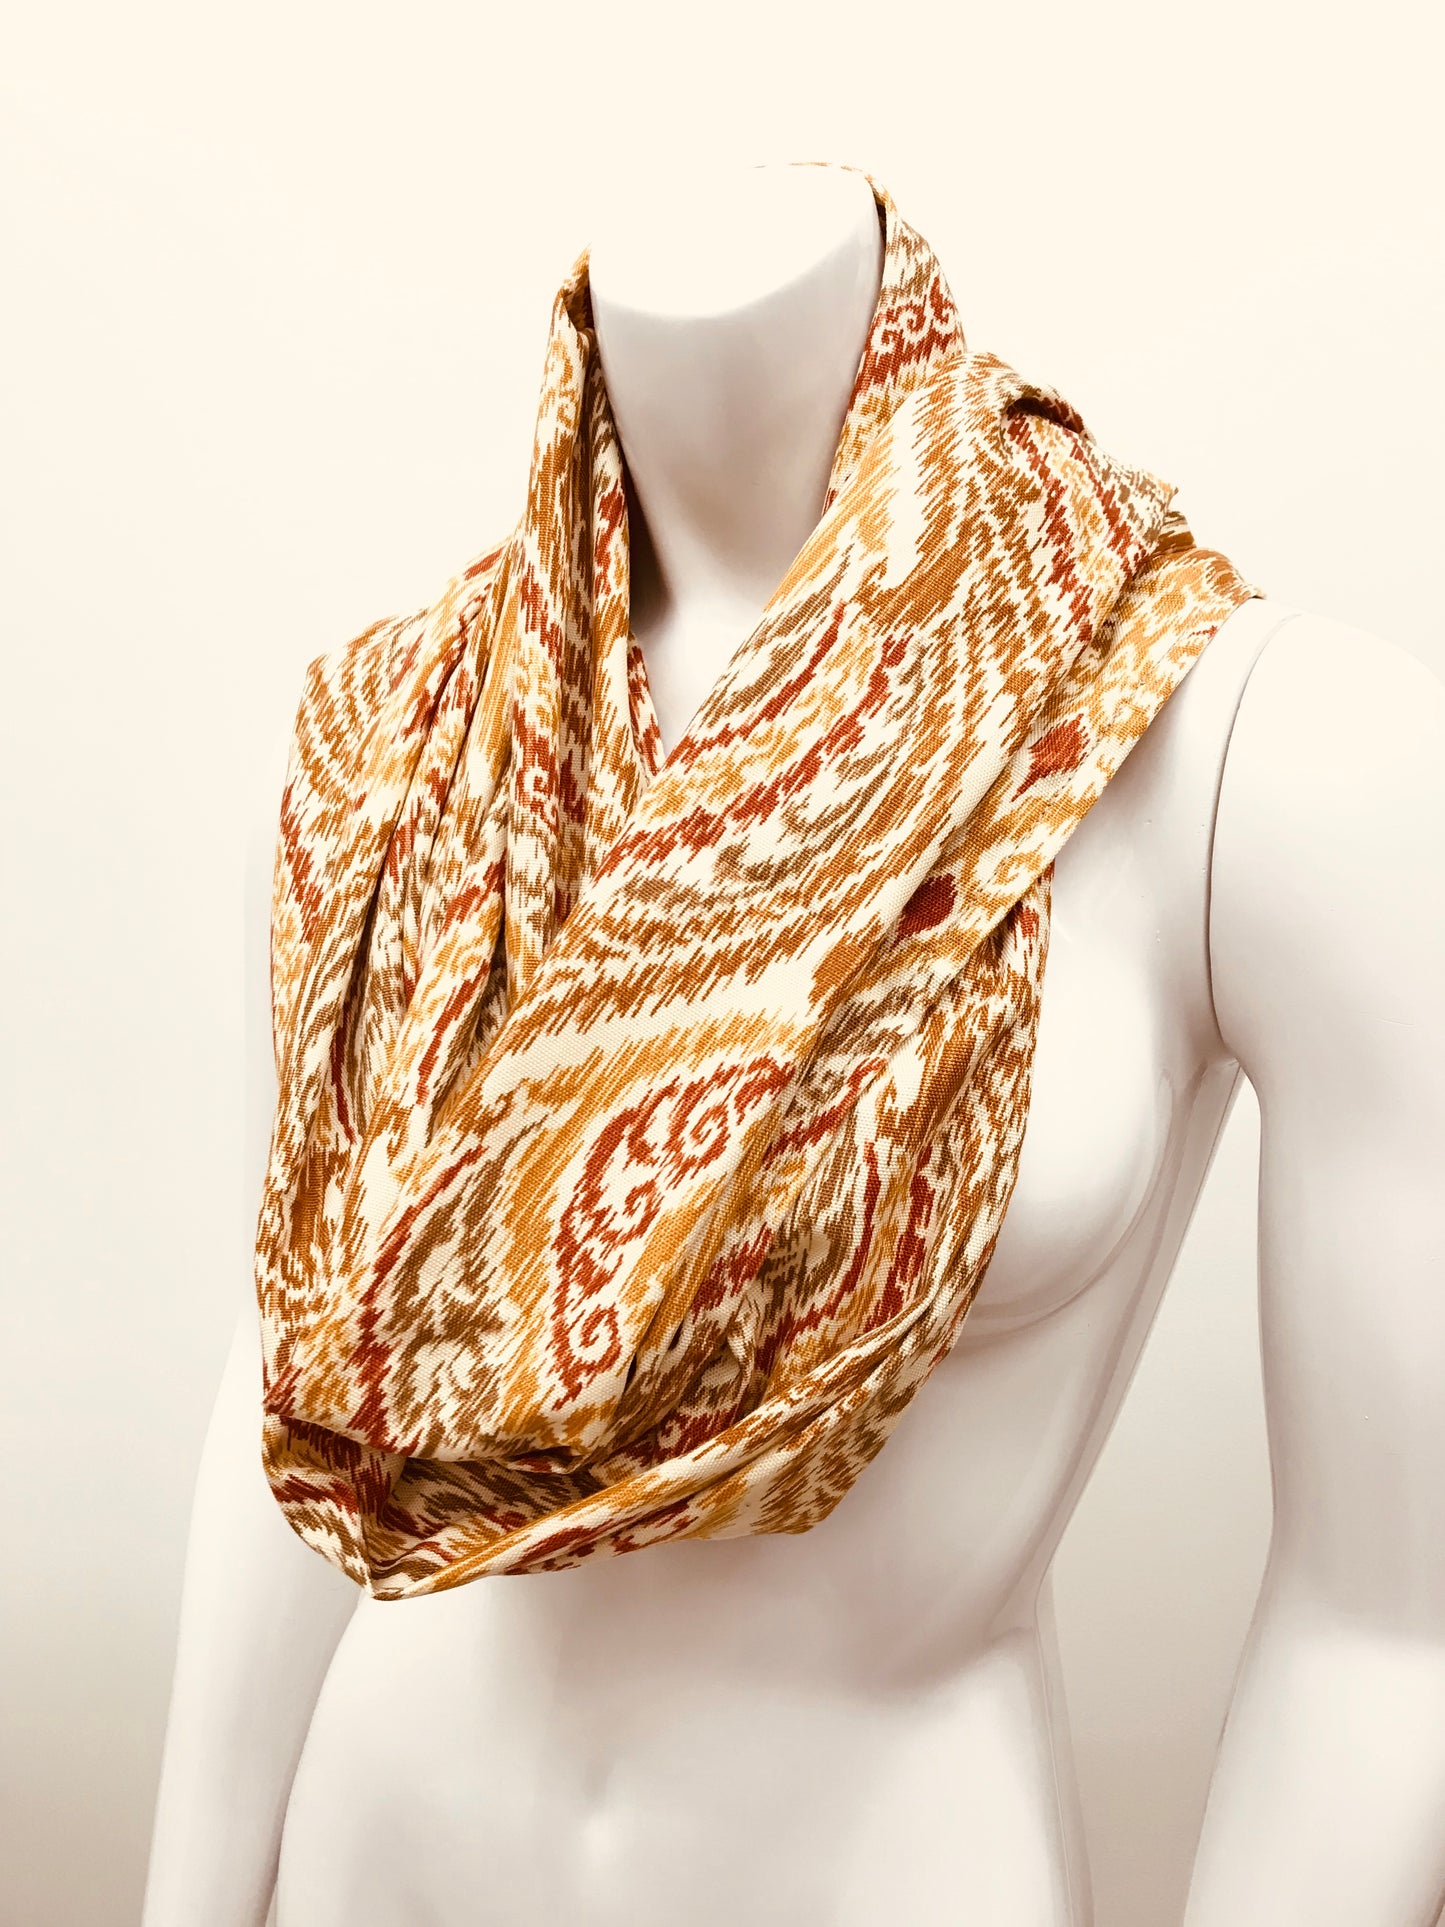 Turn your infinity scarf into a support for your meditation practice, quick snap and adjust to align the spine and sit in comfort. Created by My Yoga Room Elements and produced in Canada . Orange and Gold Damask